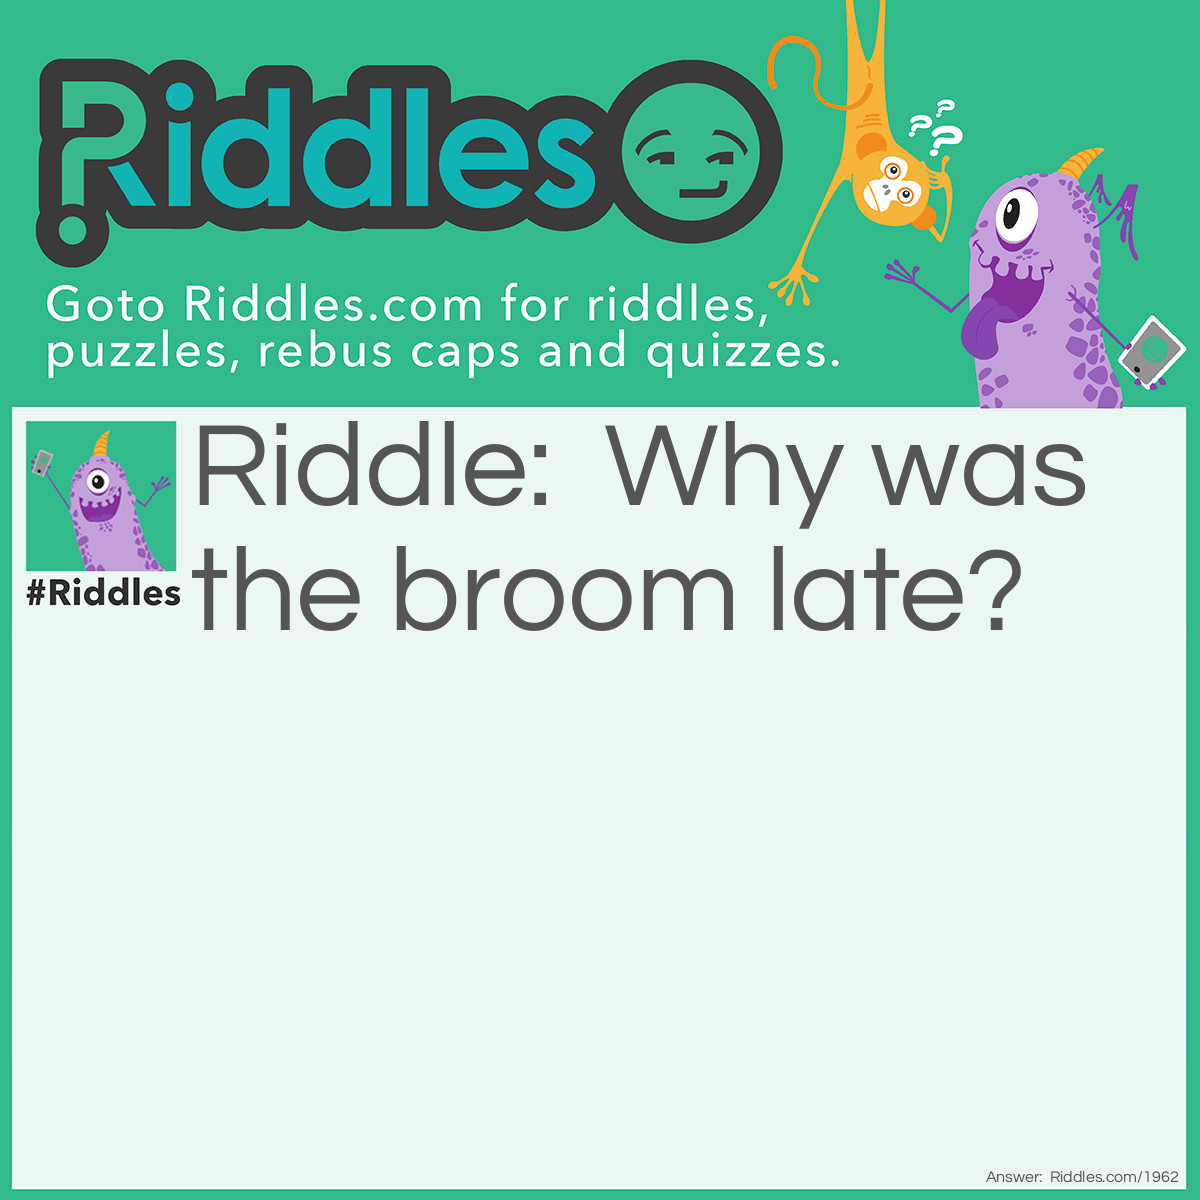 Riddle: Why was the broom late? Answer: It overswept.